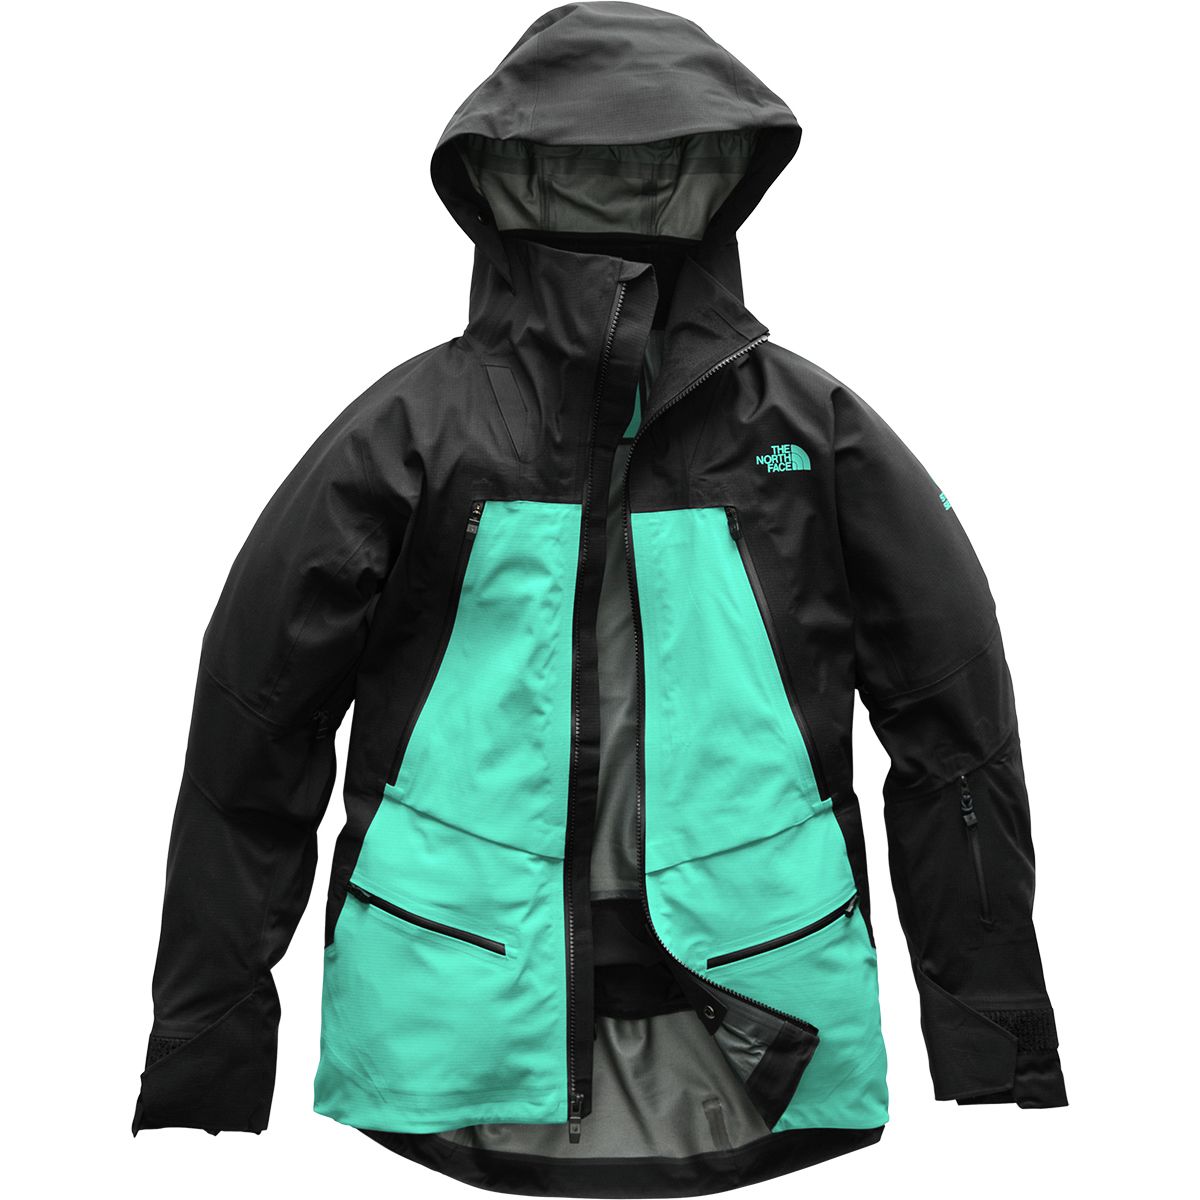 The North Face Purist Jacket - Women's | Backcountry.com